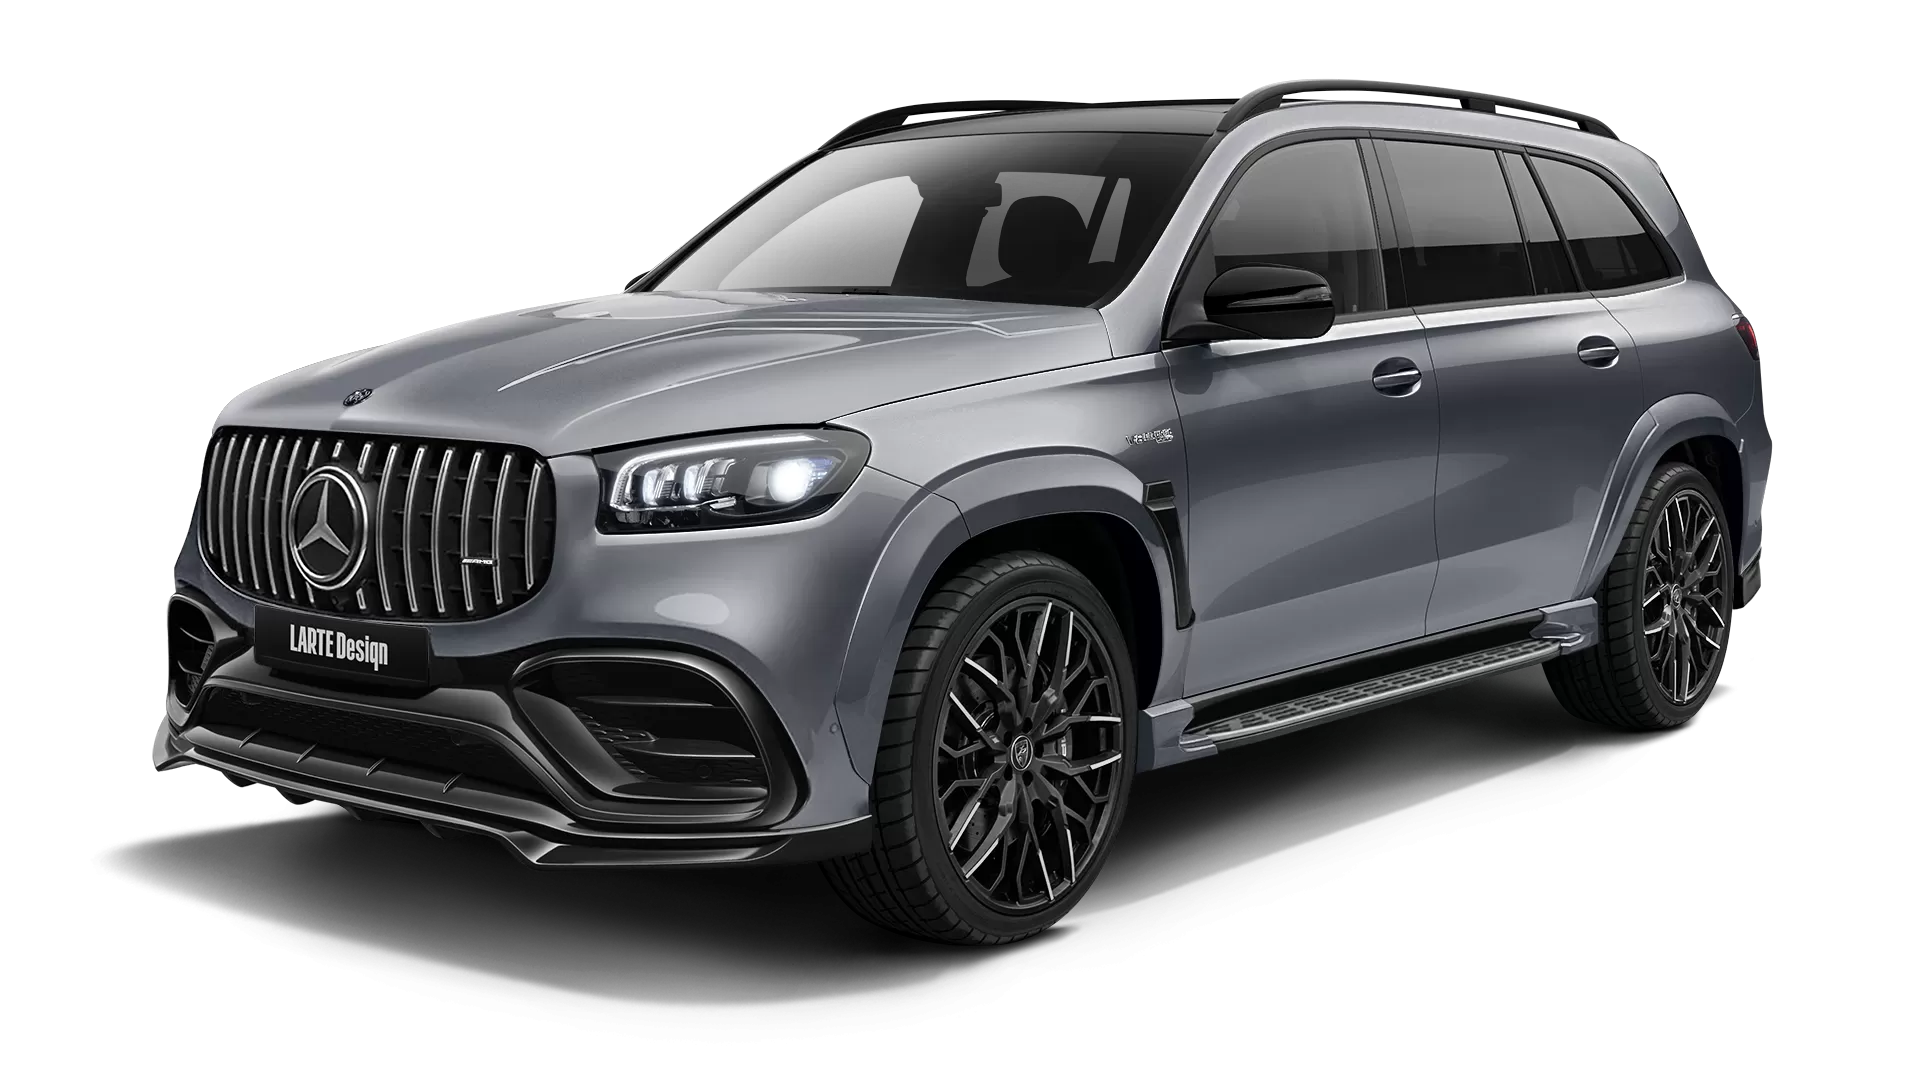 Mercedes GLS 63 AMG X167 with painted body kit: front view shown in Selenite Grey